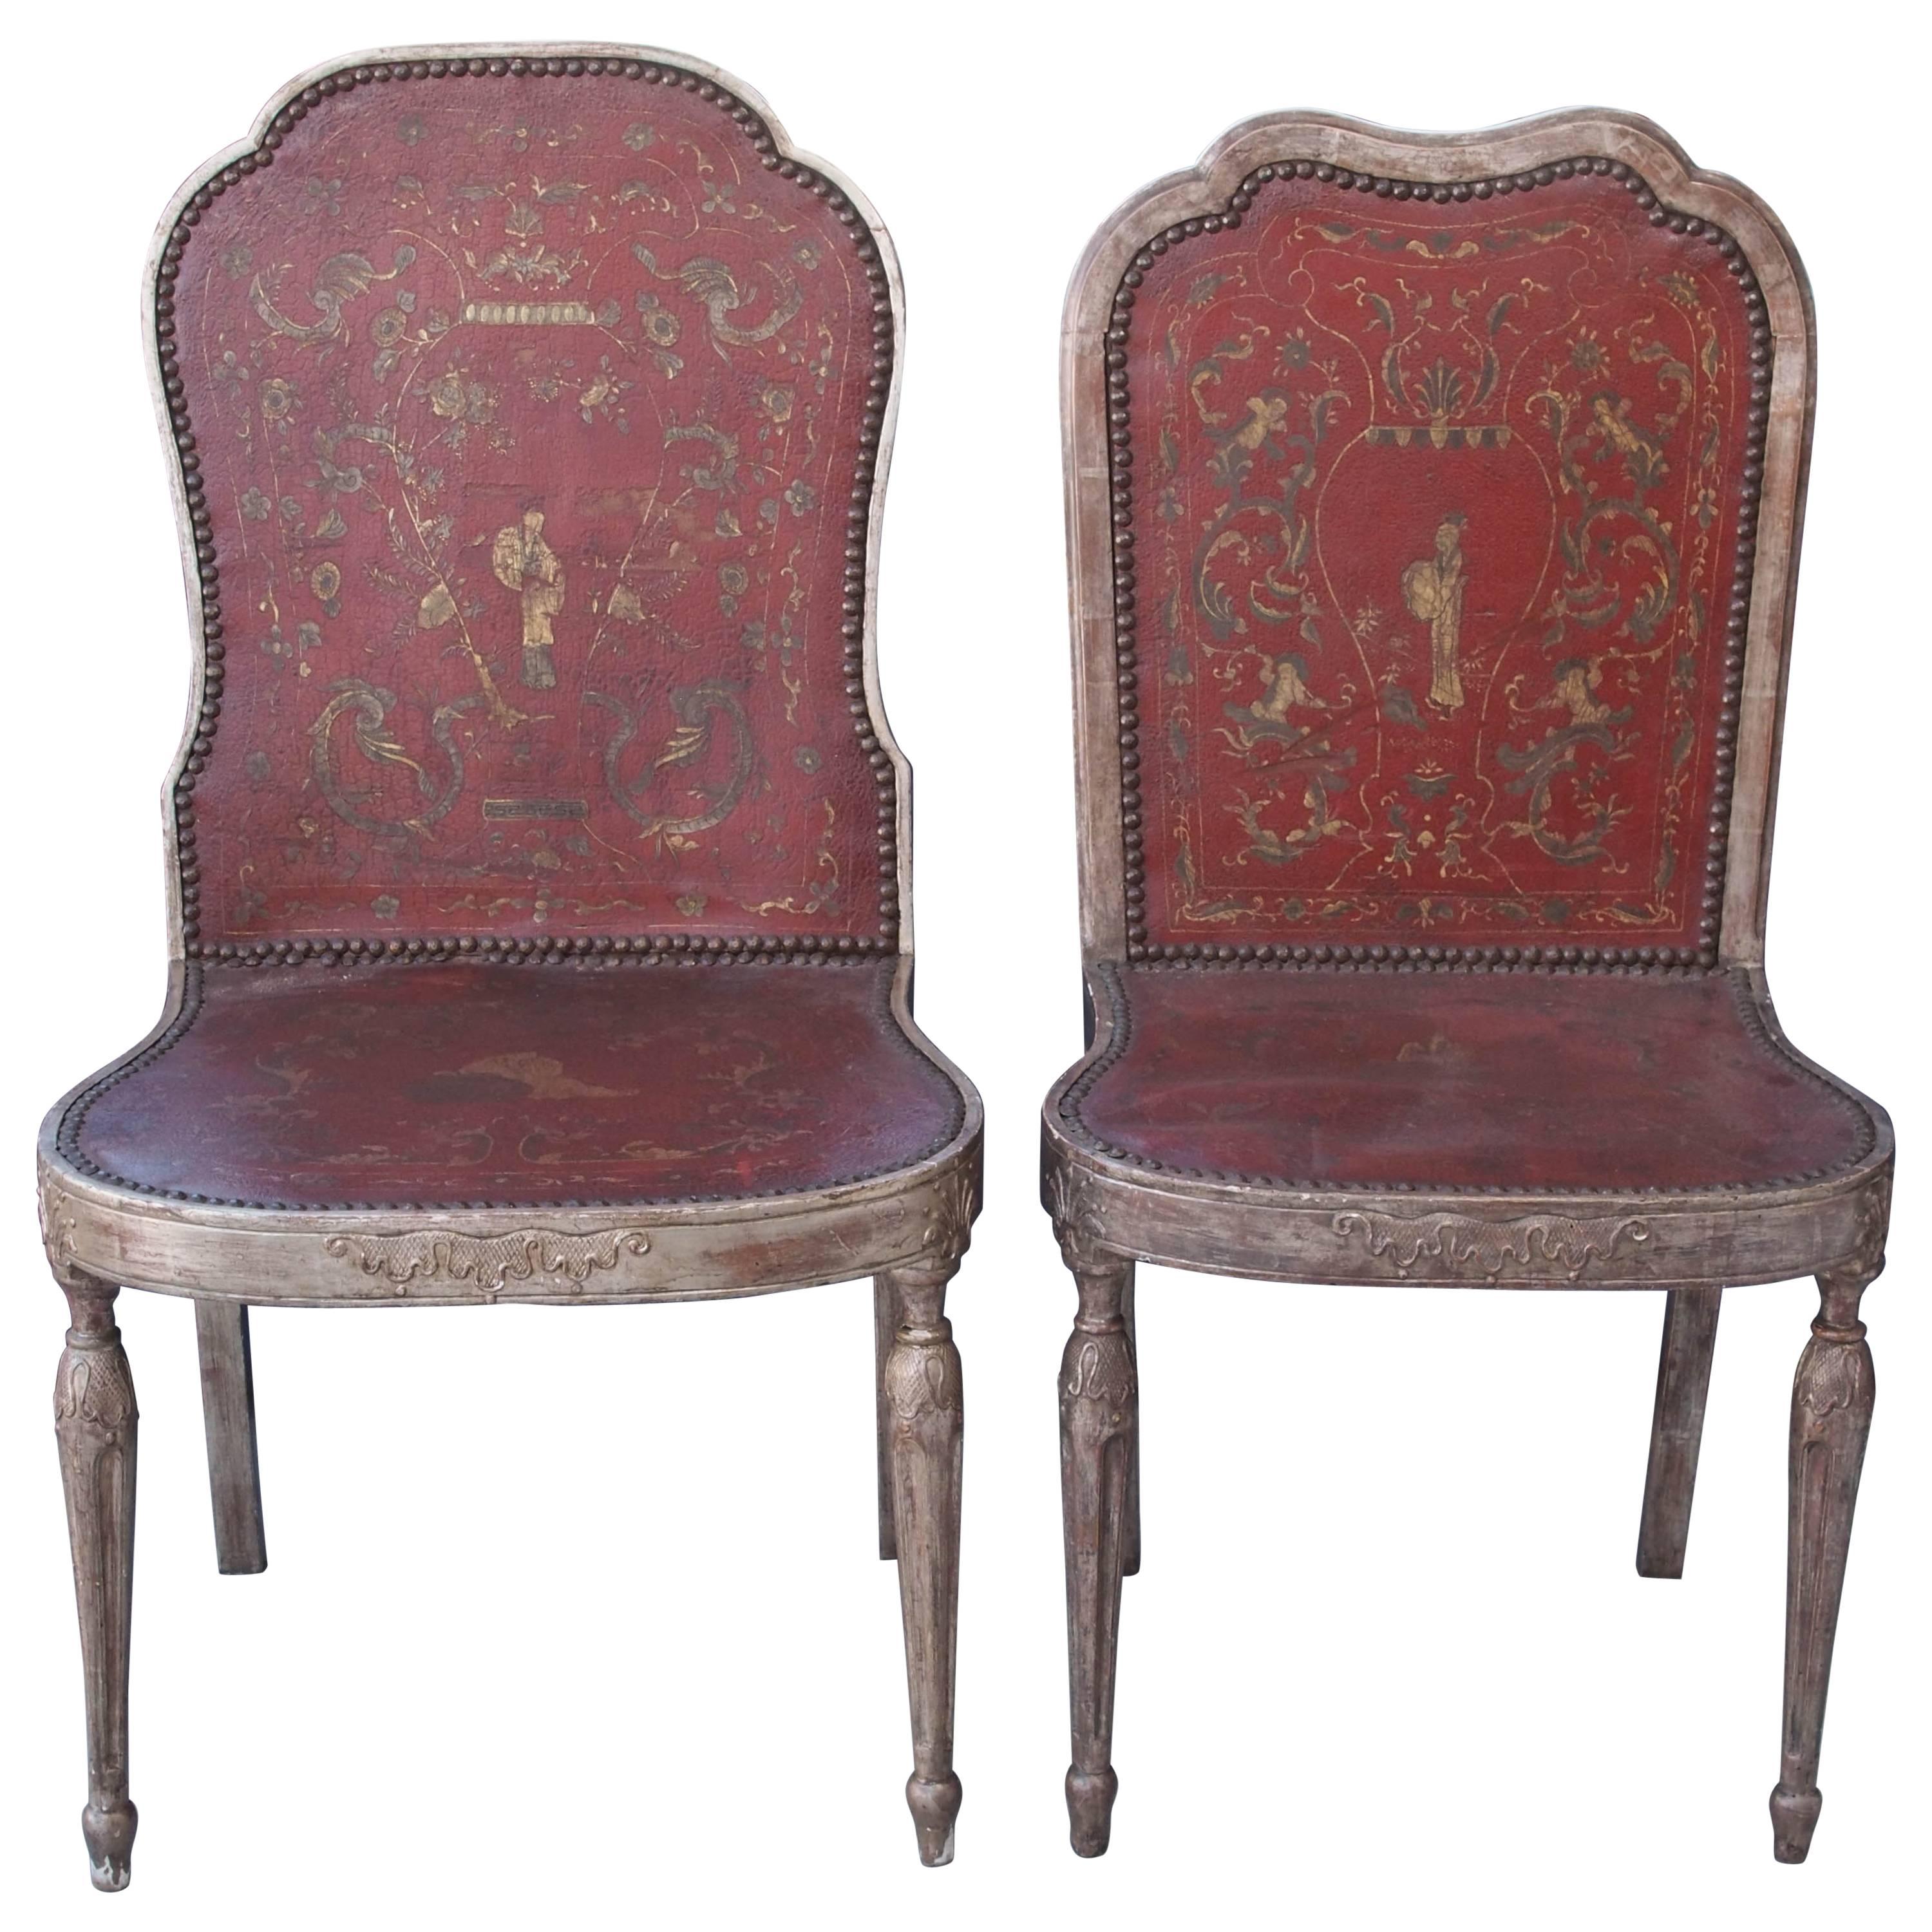 Two Sets of Four Silver Gilt Chairs with Chinoisorie Leather Seats and Backs